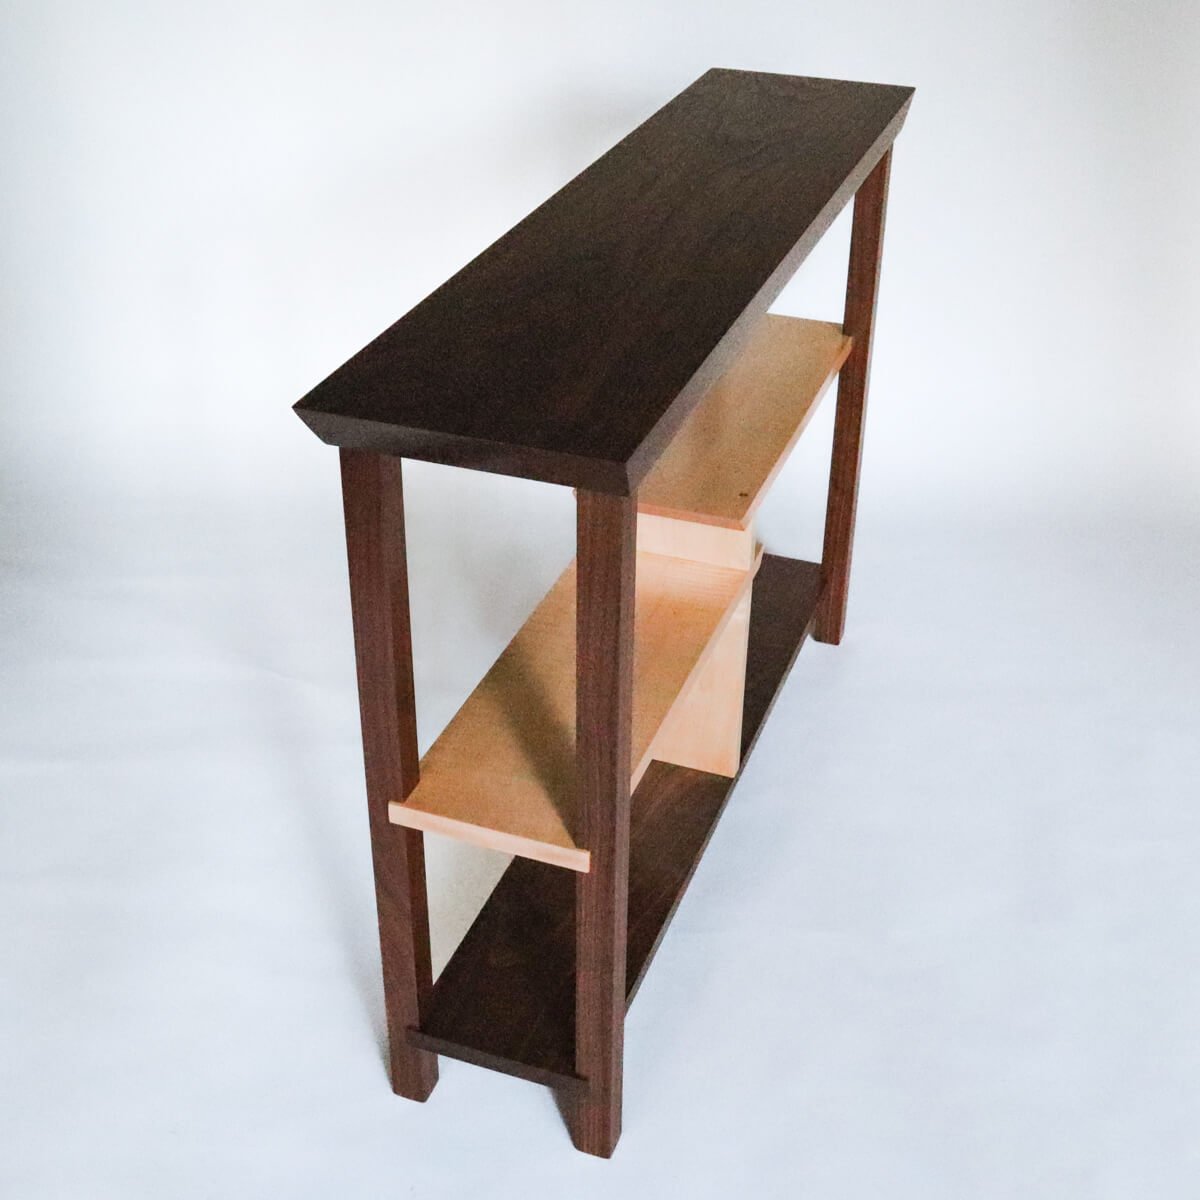 a narrow side table console in walnut wood with tiger maple shelves by Mokuzai Furniture